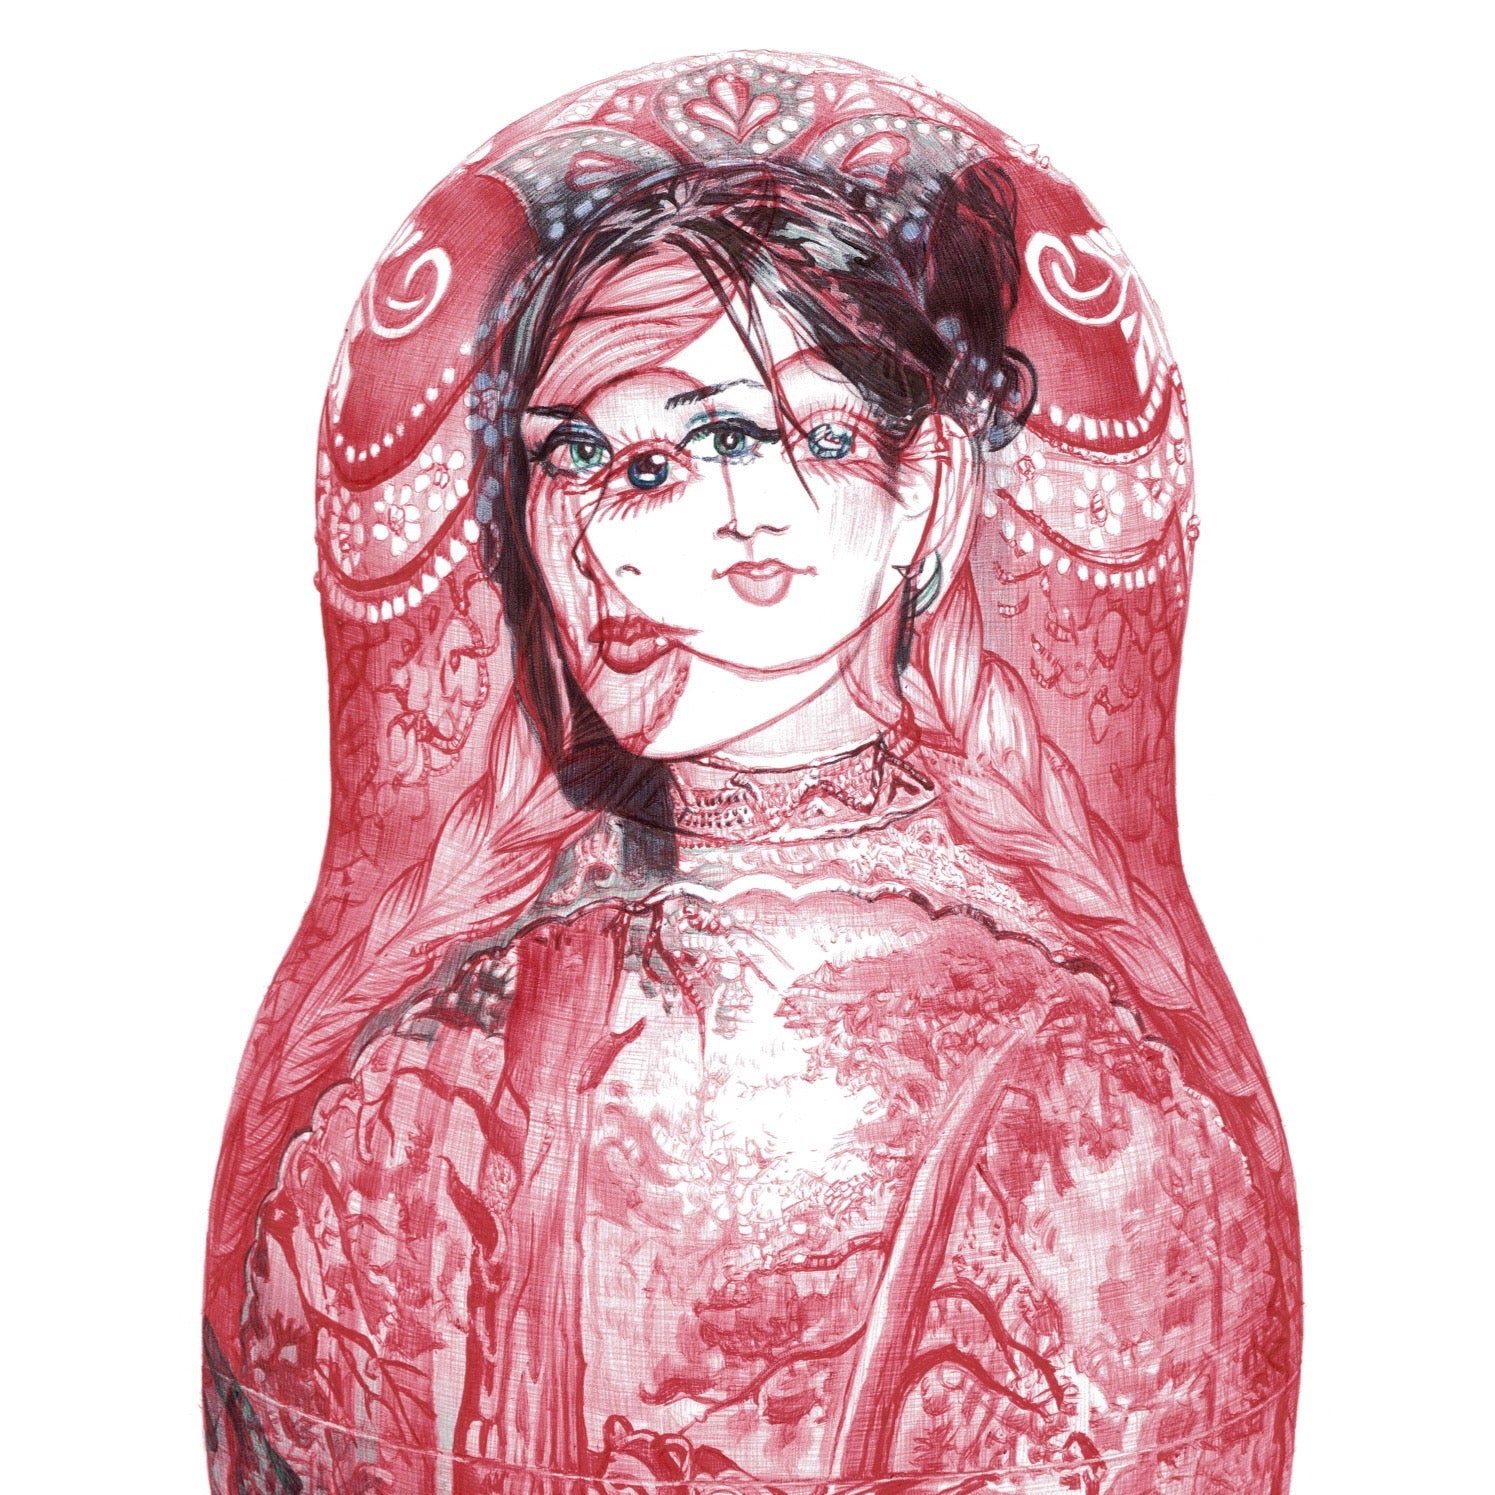 Russian Doll Limited Edition Print